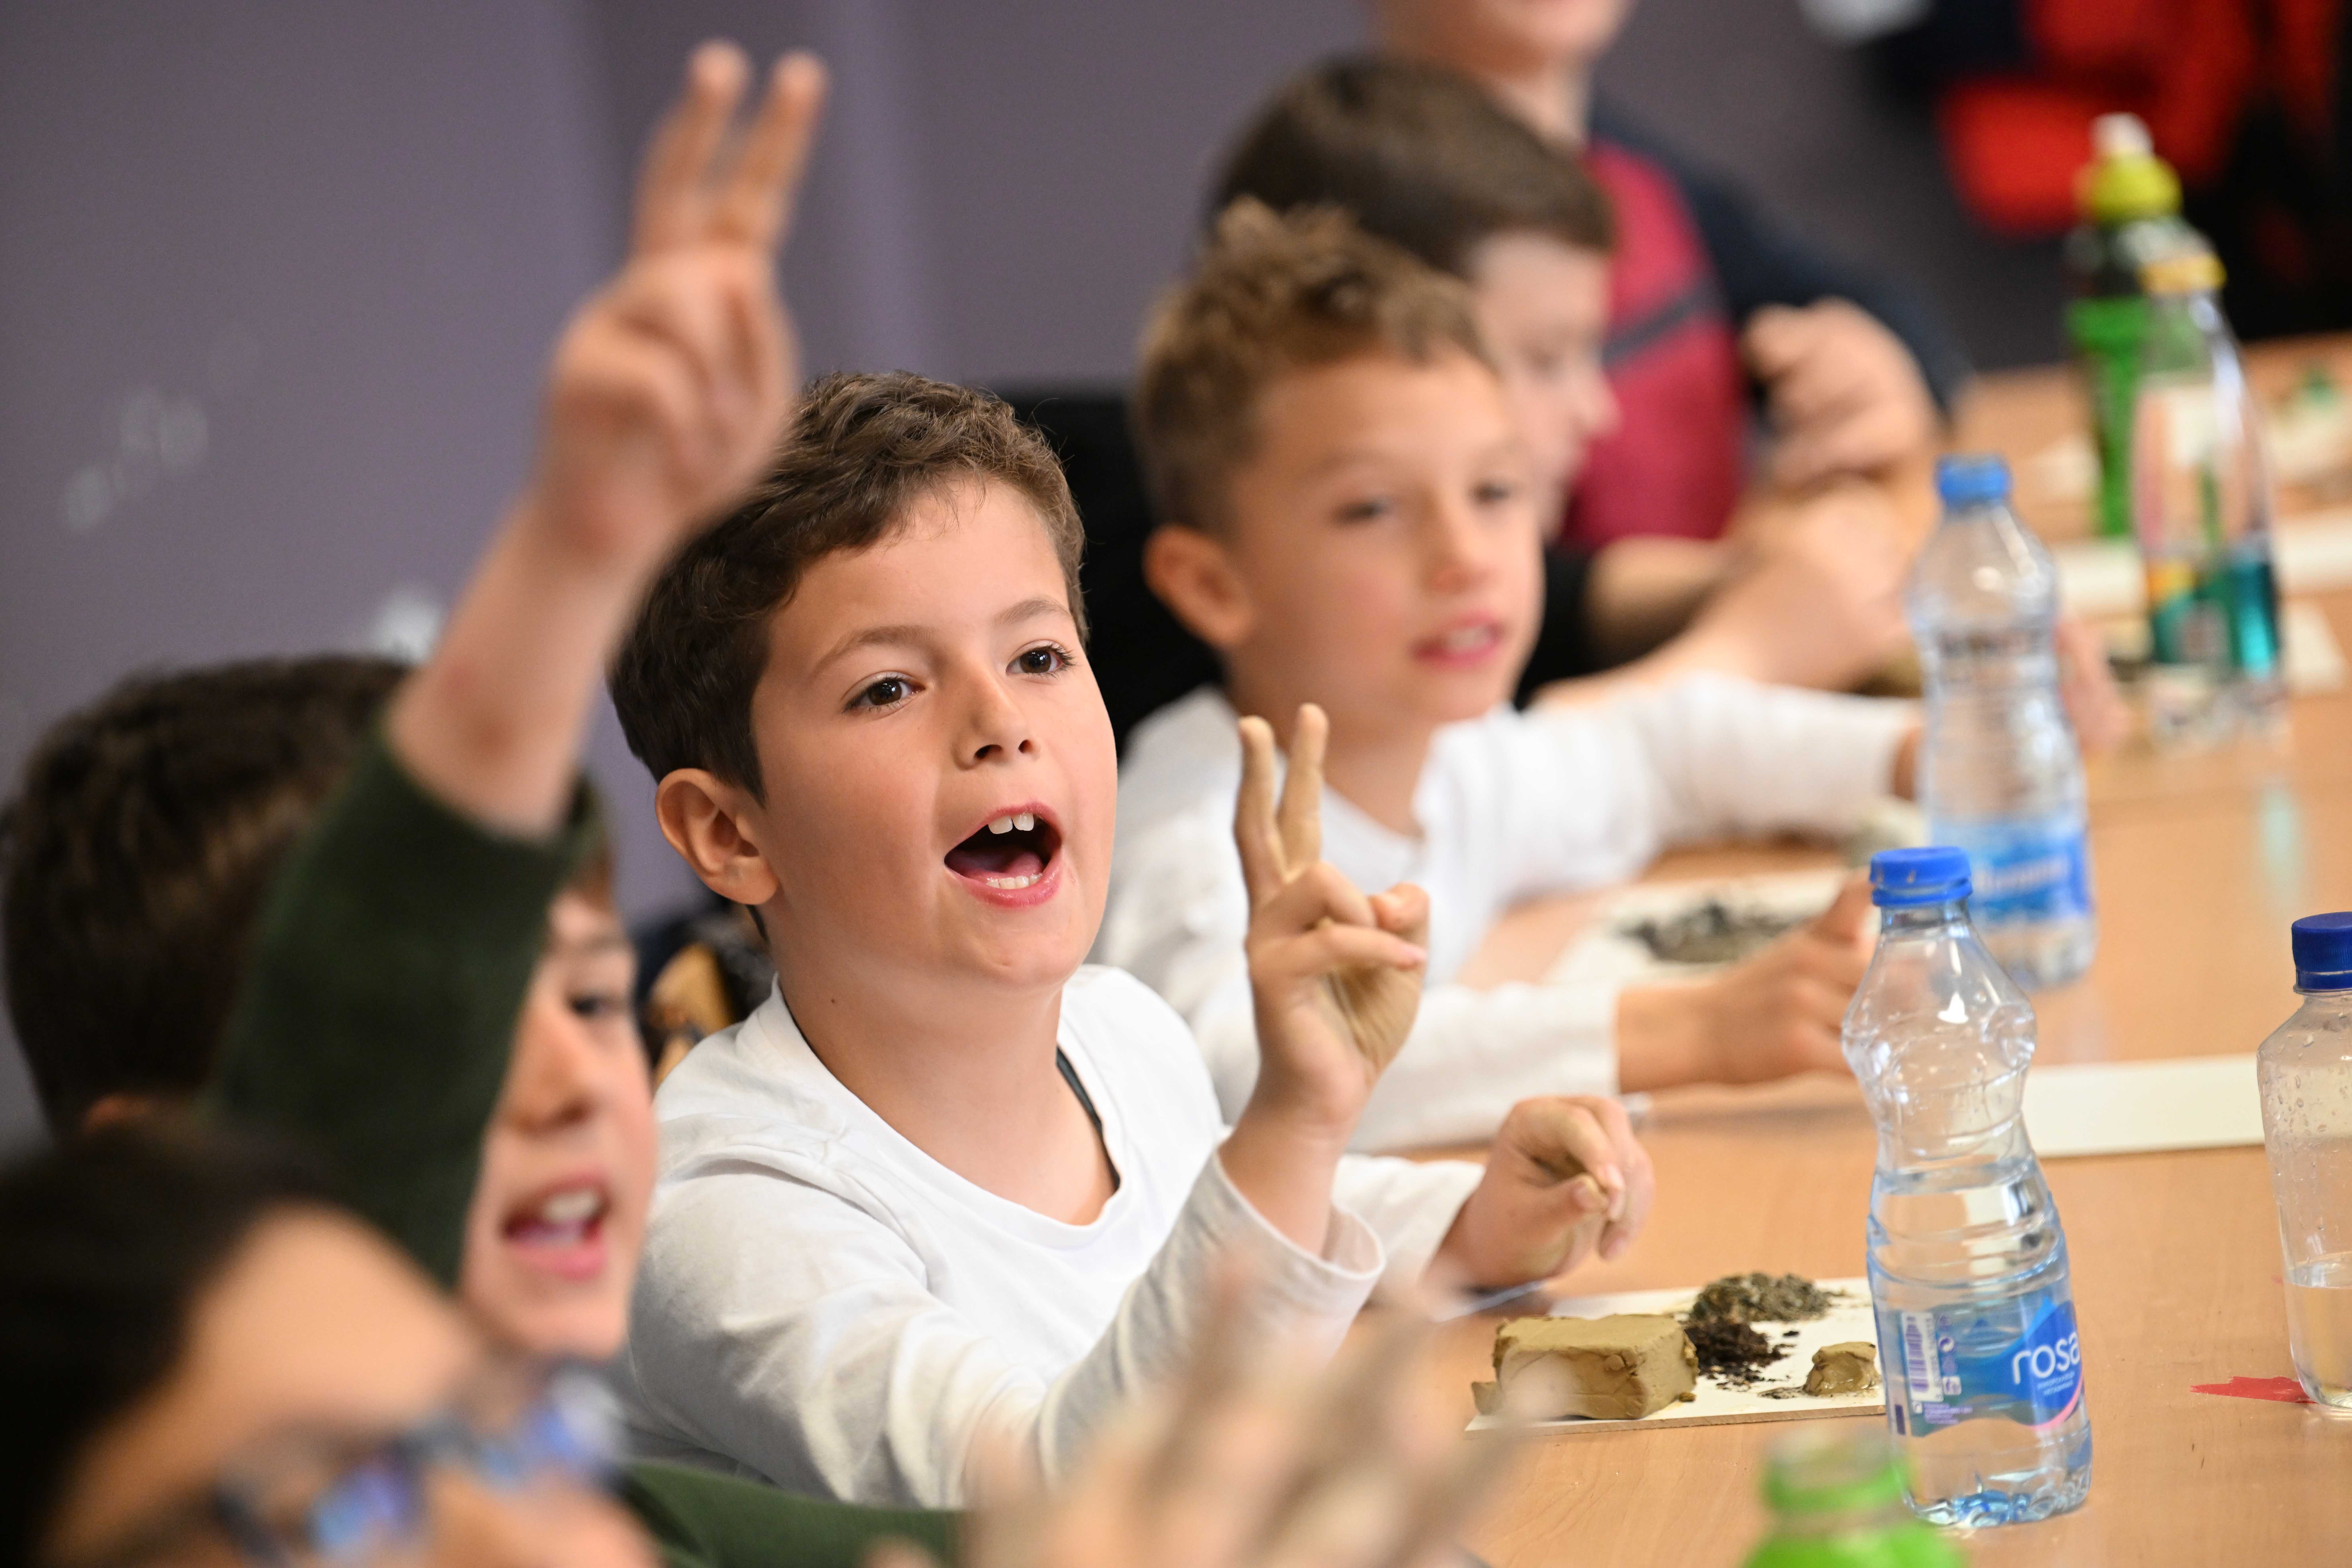 Young boys raising their hands during class